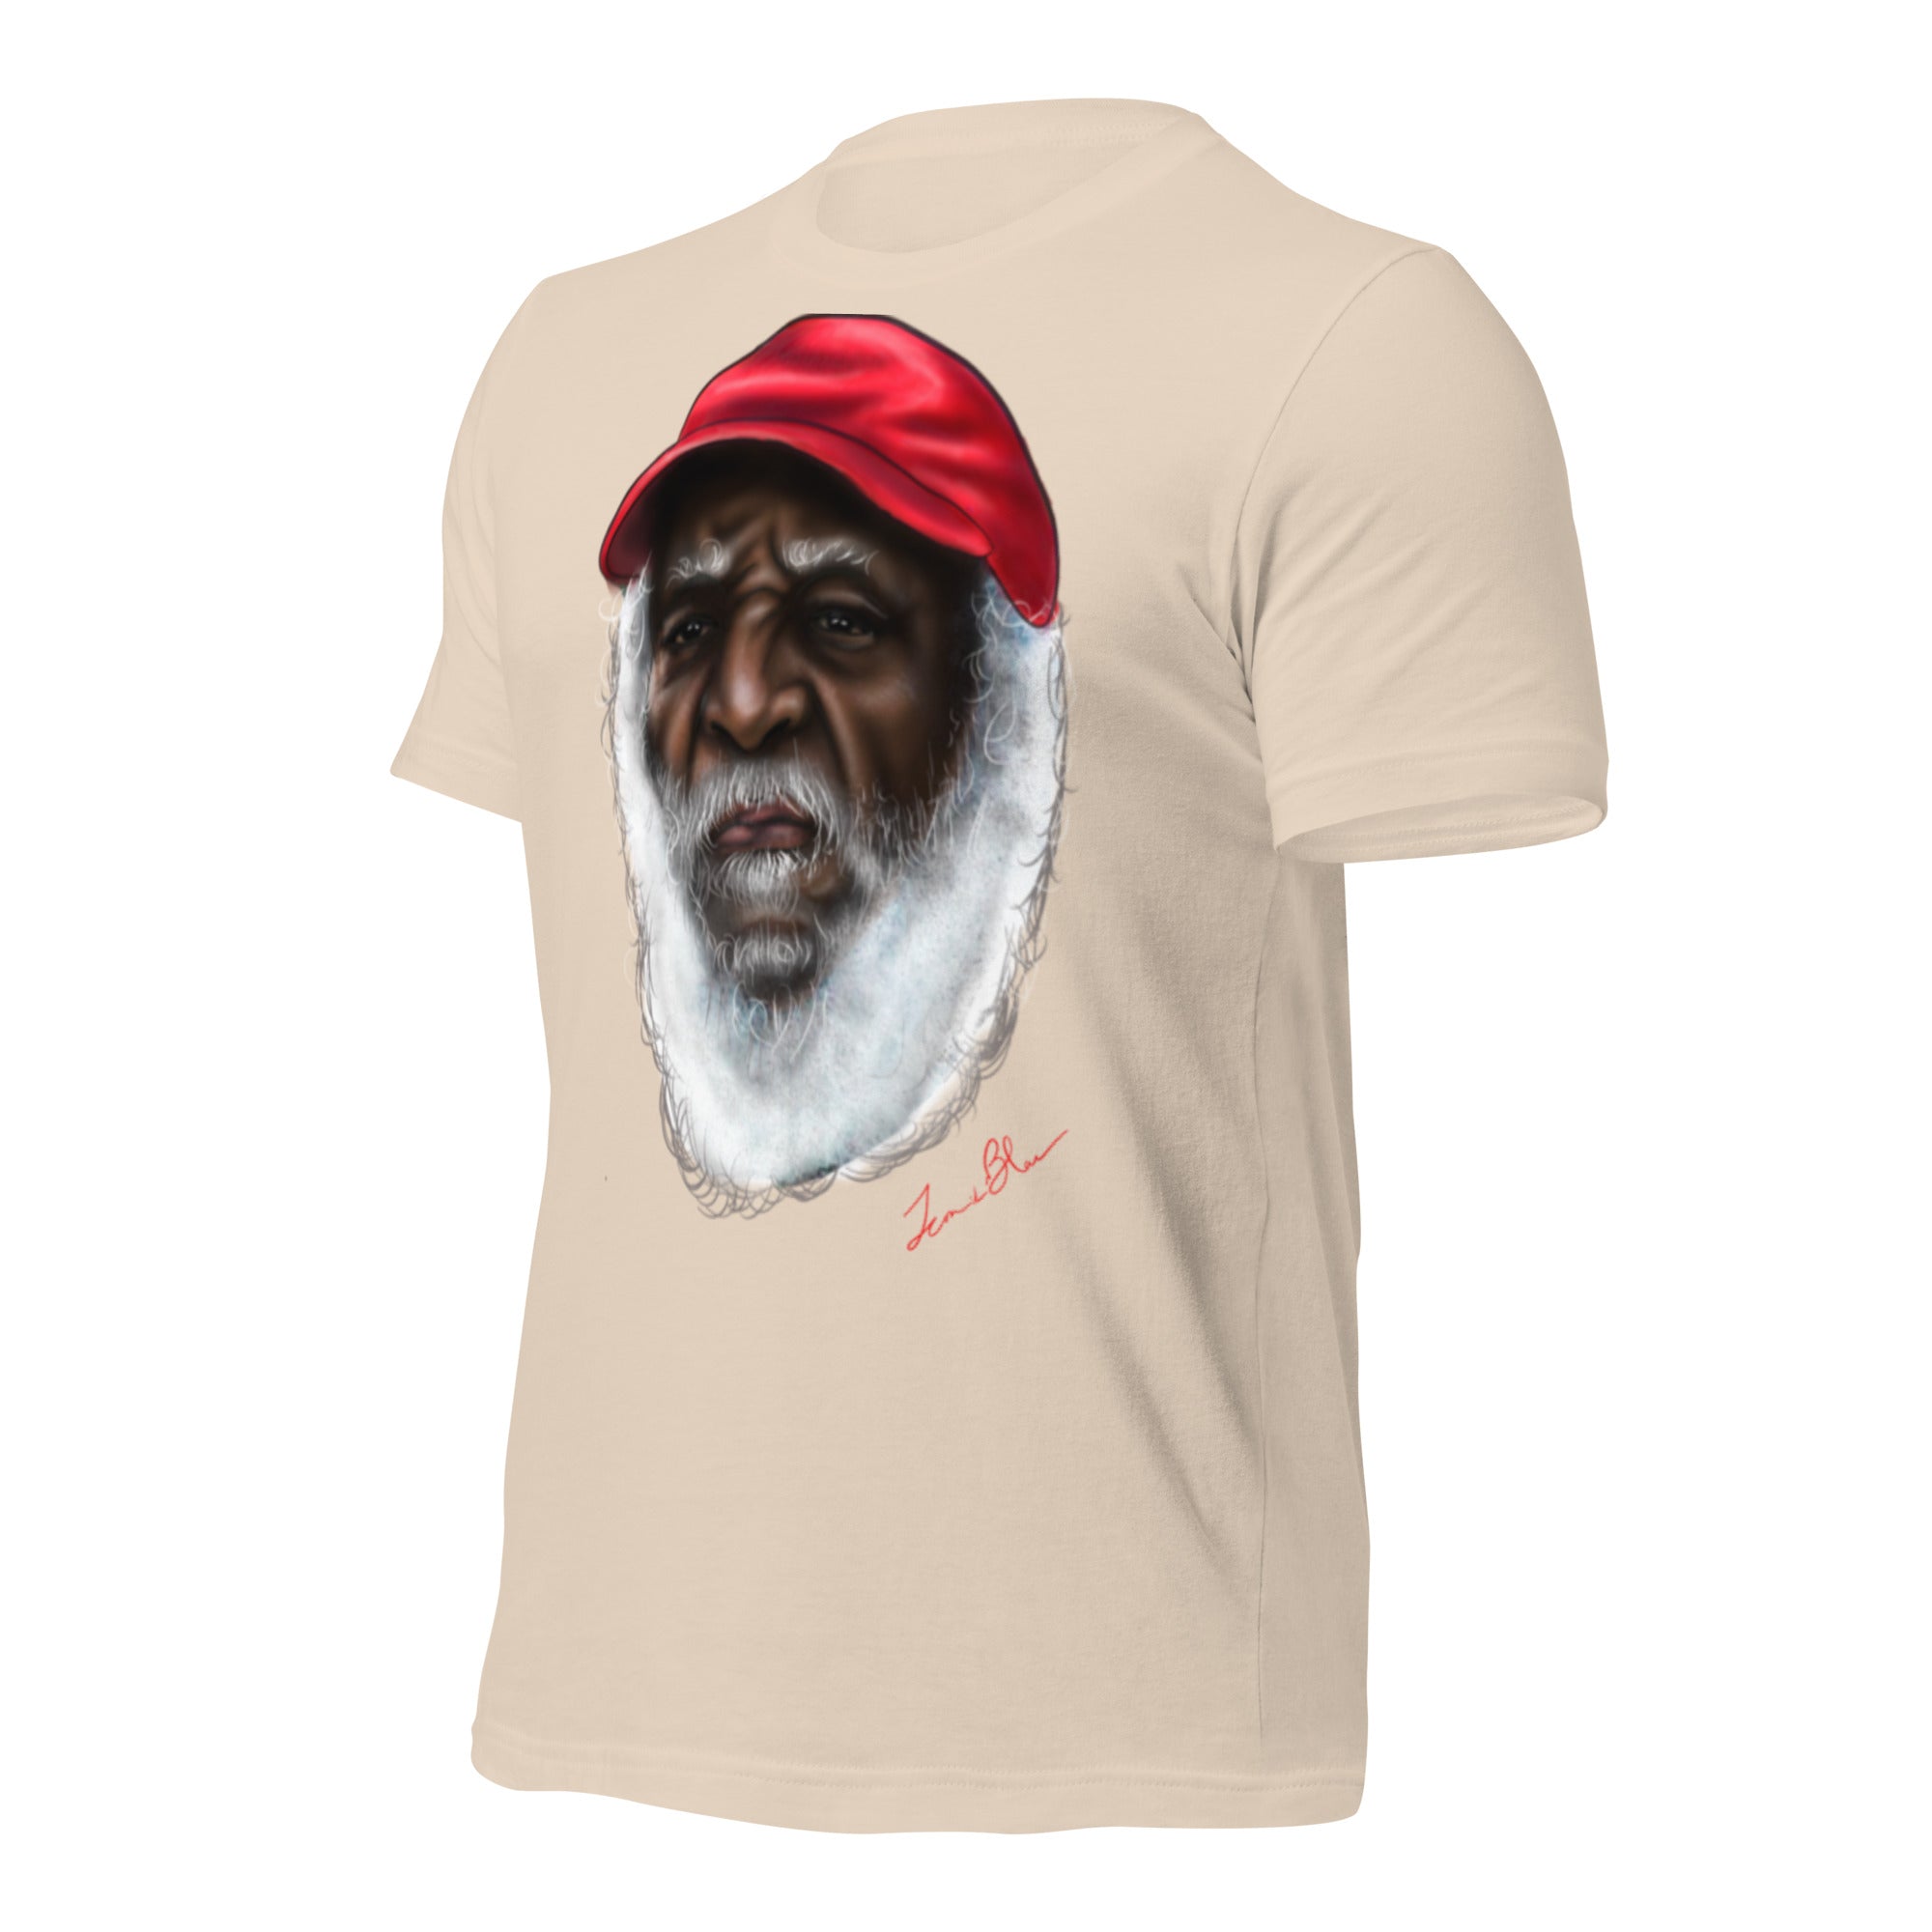 DICK GREGORY ICONIK BLAC GRAPHIC T